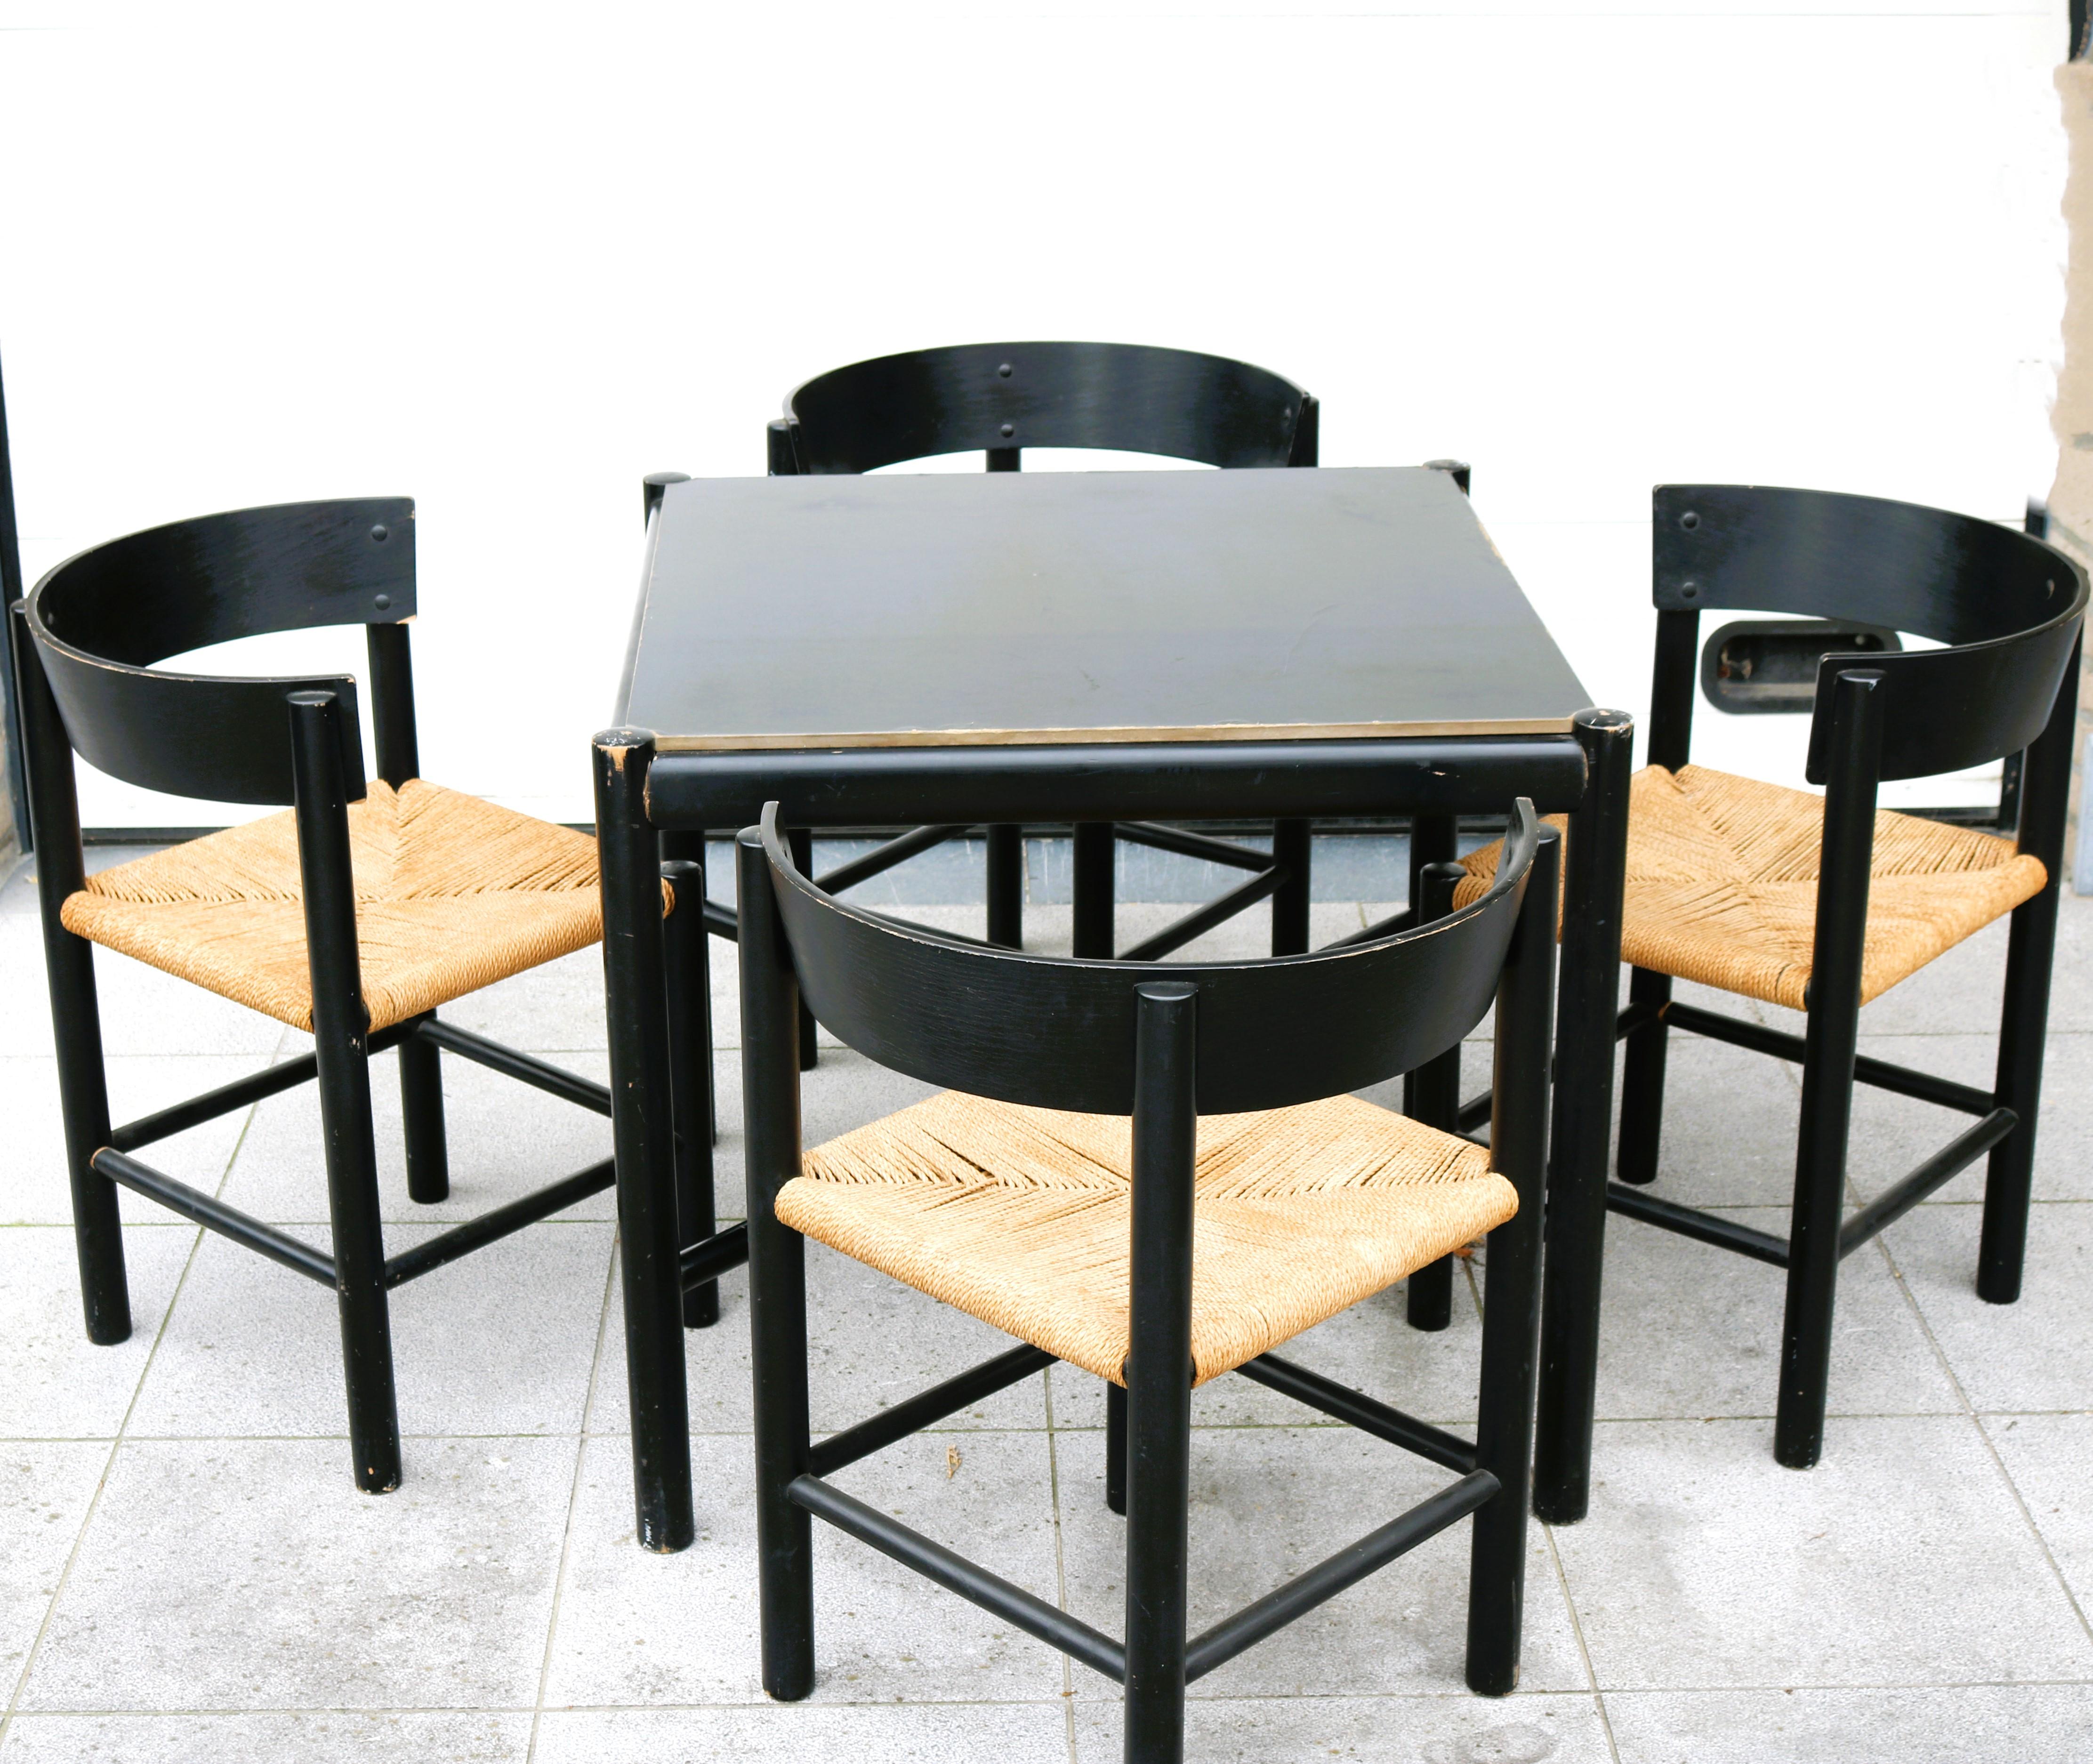 Set of four chairs and a table designed by Mogens Lassen for Fritz Hansen in 1964. Black lacquered wood and papercord, in original condition. The set is quite small, so it could fit in any room.The table is the model 4624 and the chair 4216.